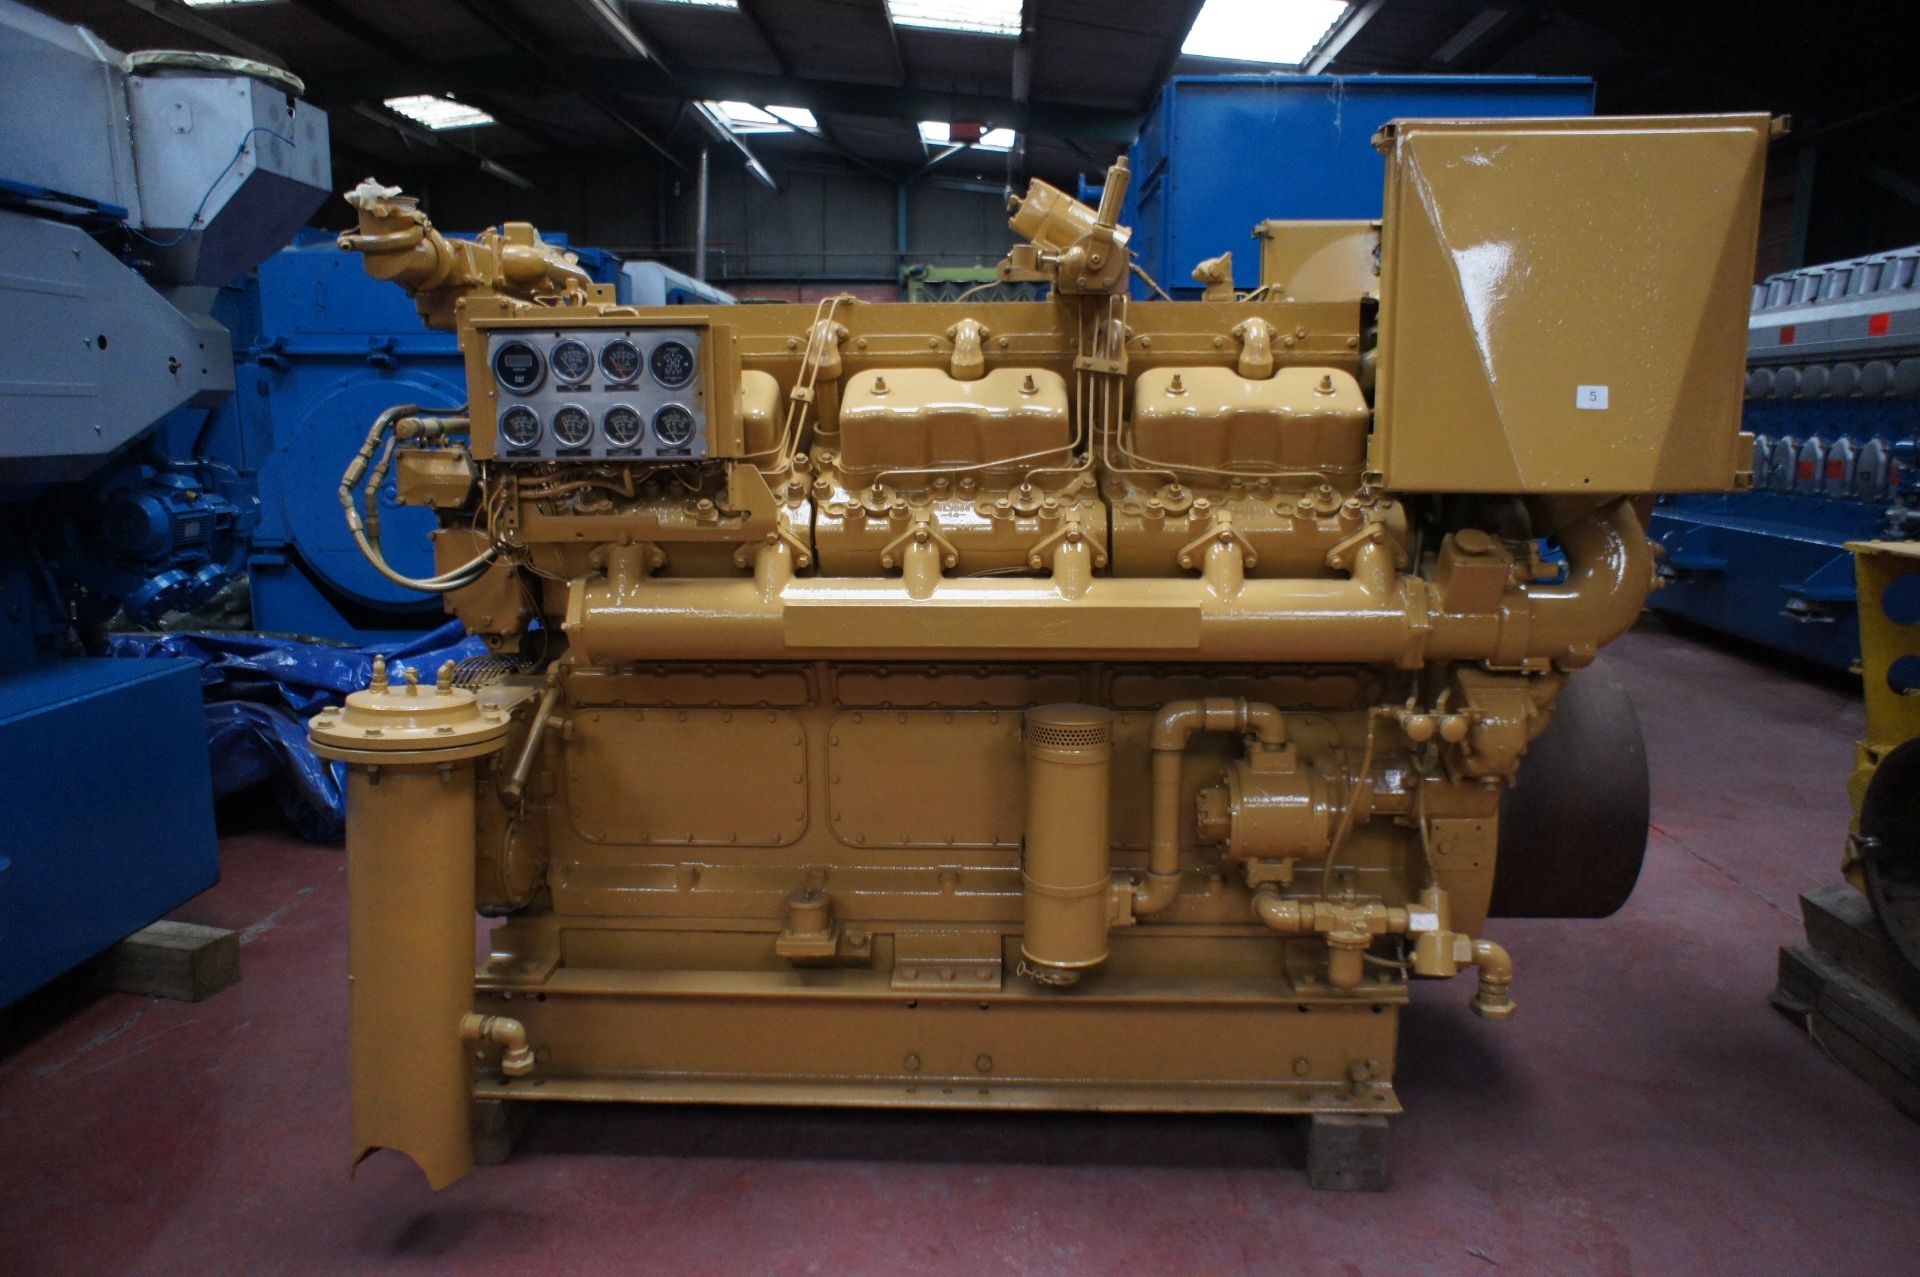 * Caterpillar D398 V12, 4-Stroke-Cycle Water cooled Diesel Engine with Radiator. Please note this